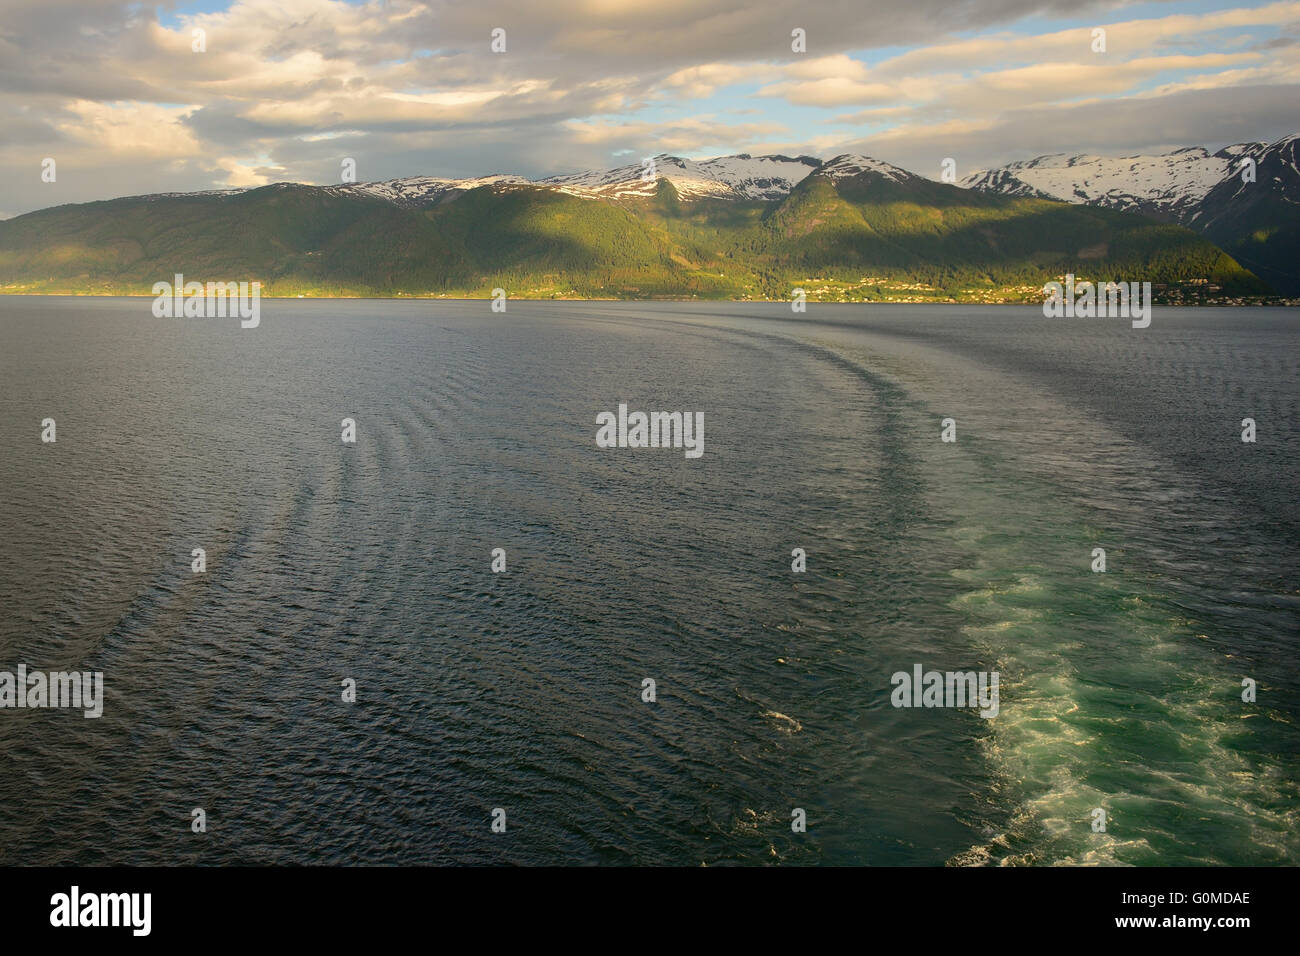 Sailing away from Balestrand on the Sognefjord, Norway's longest fjord. Stock Photo